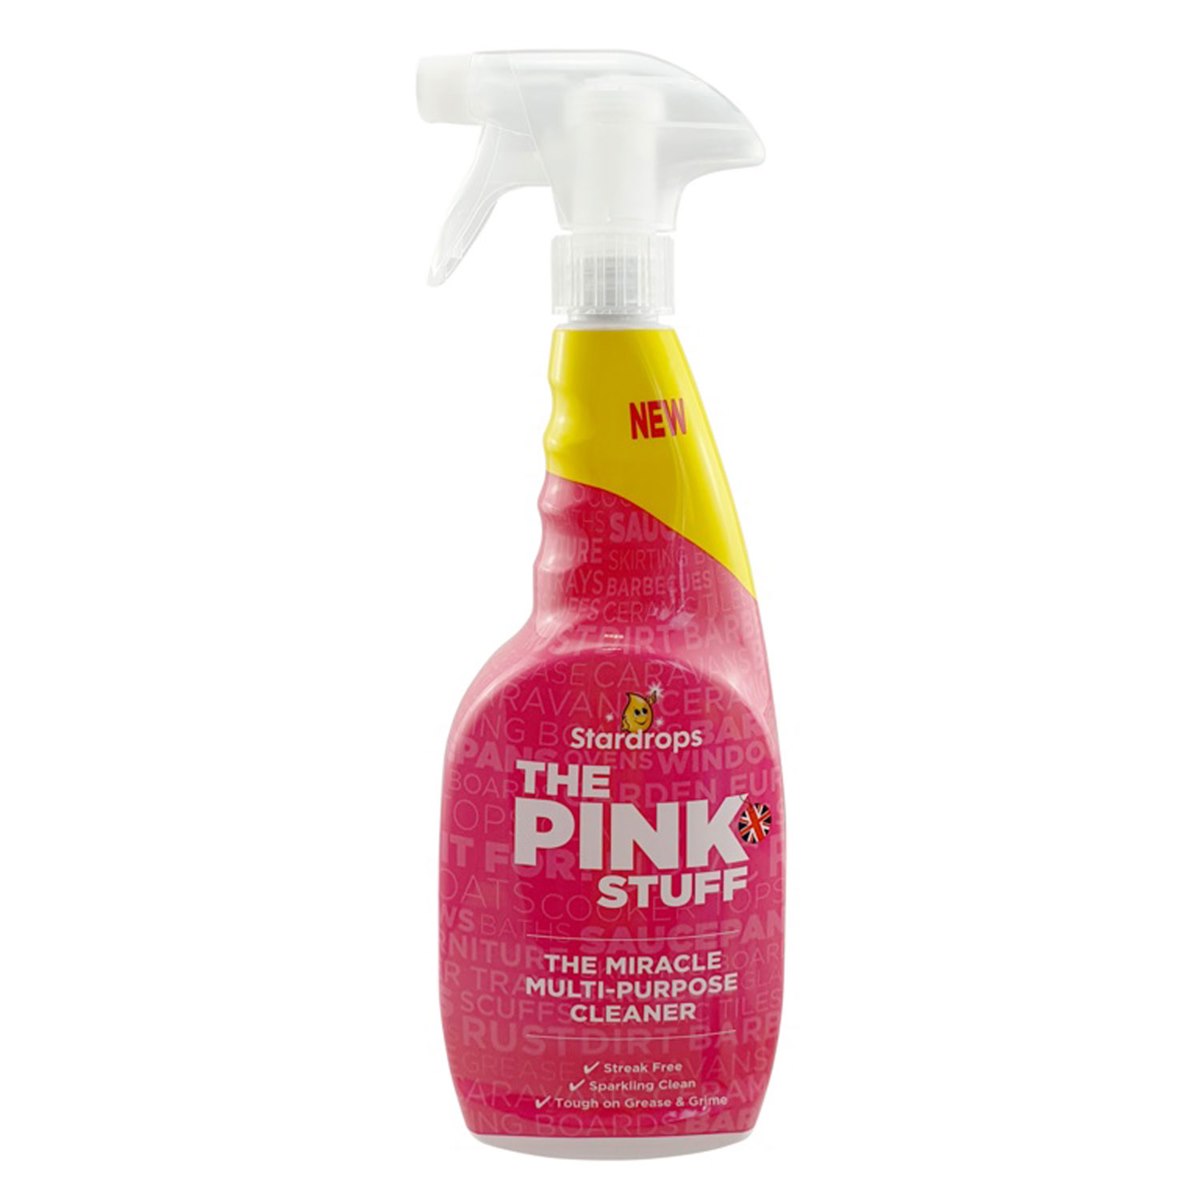 The Pink Stuff The Miracle Multi-Purpose Cleaner Spray